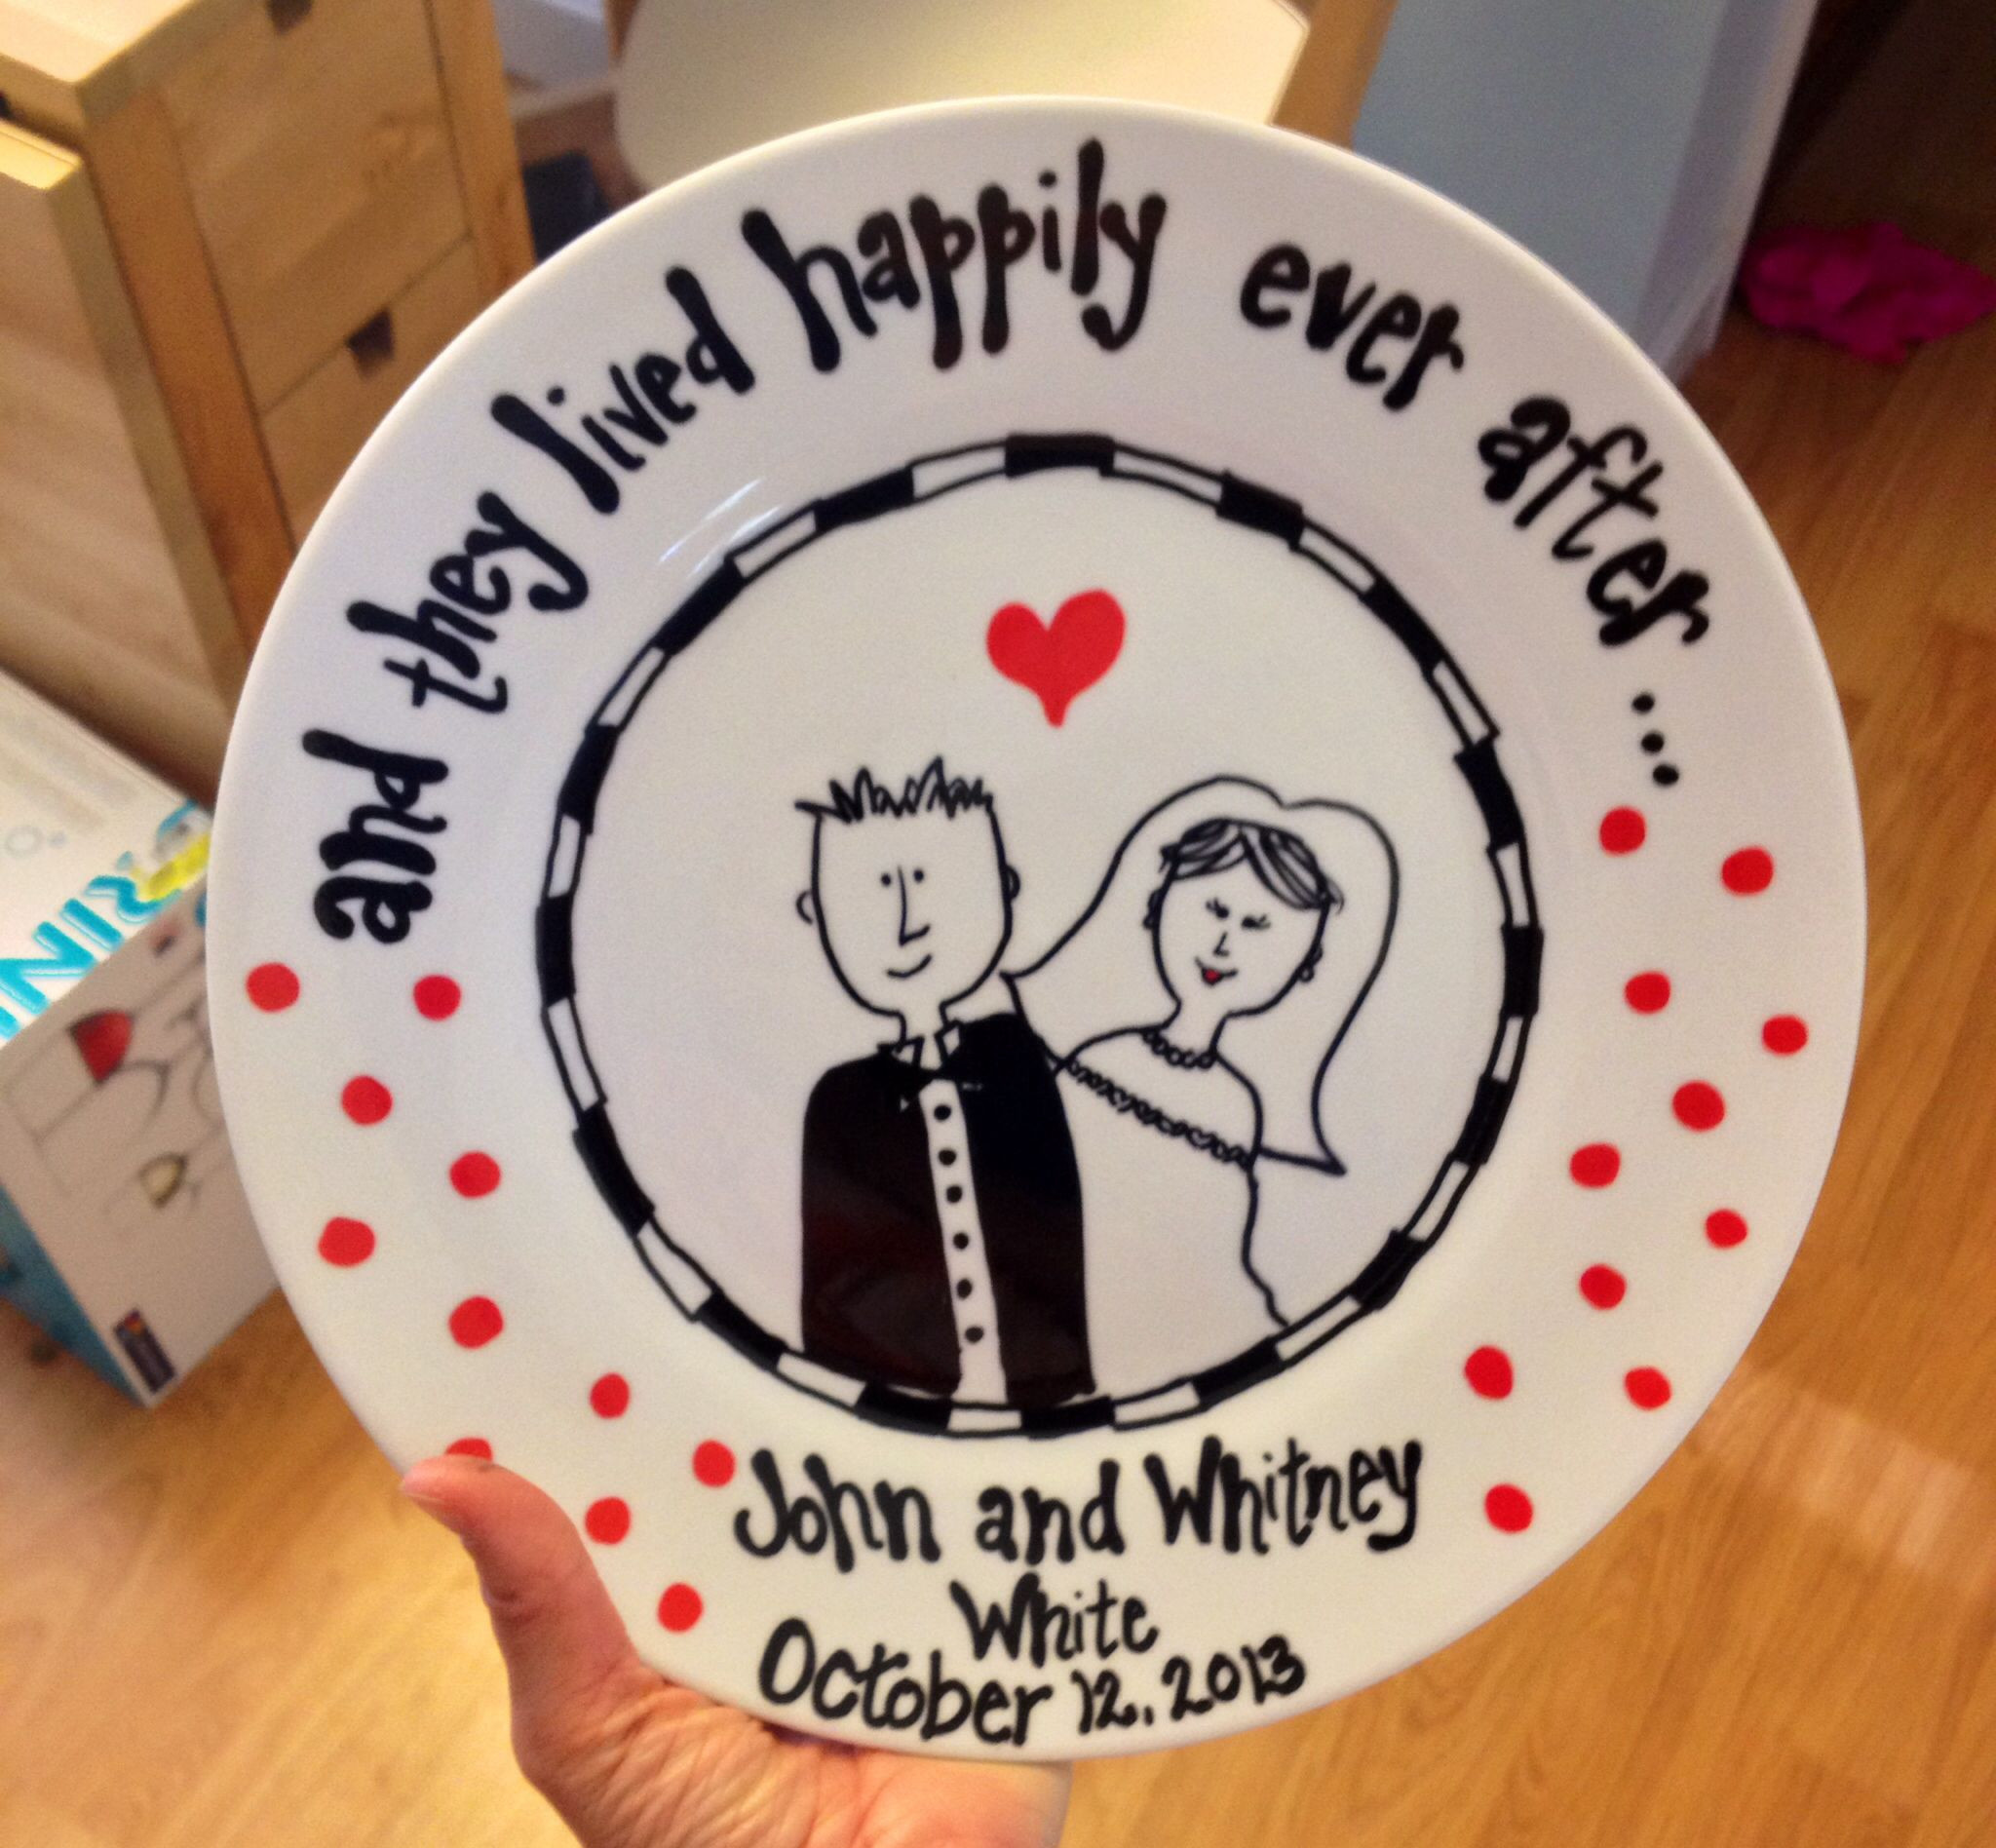 DIY Wedding Gift For Bride And Groom
 Wedding t would be cute DIY from kids